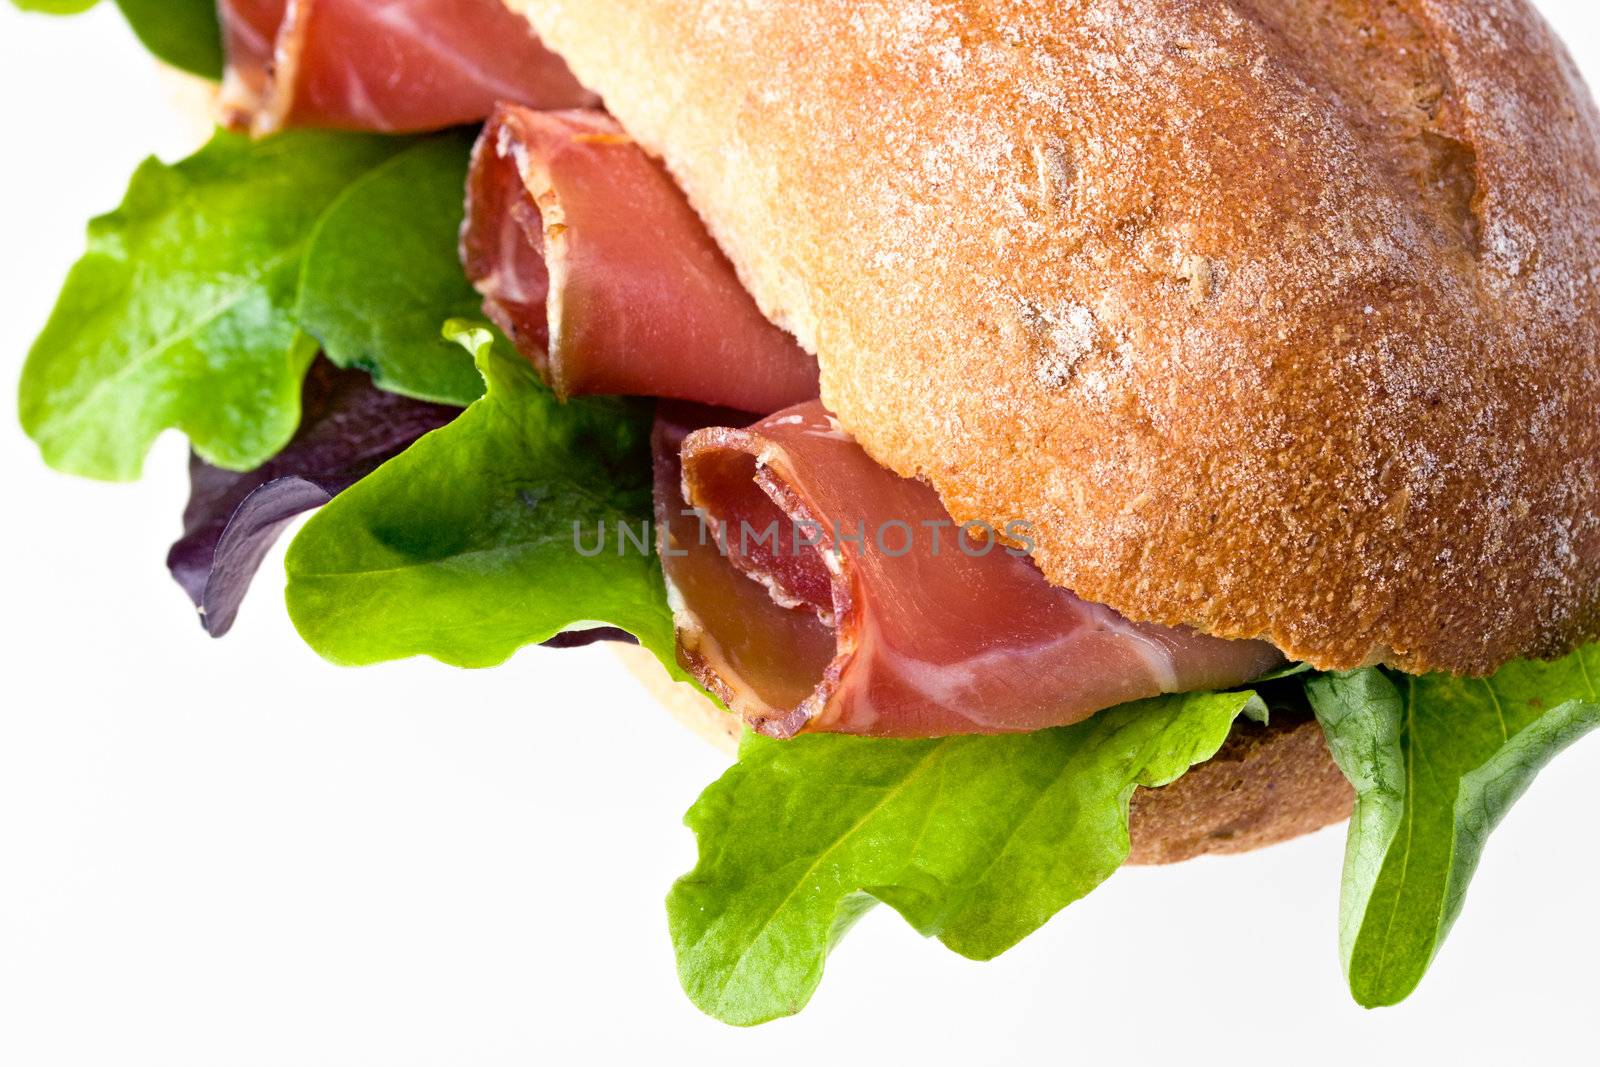 detail of a sandwich with ham and salad